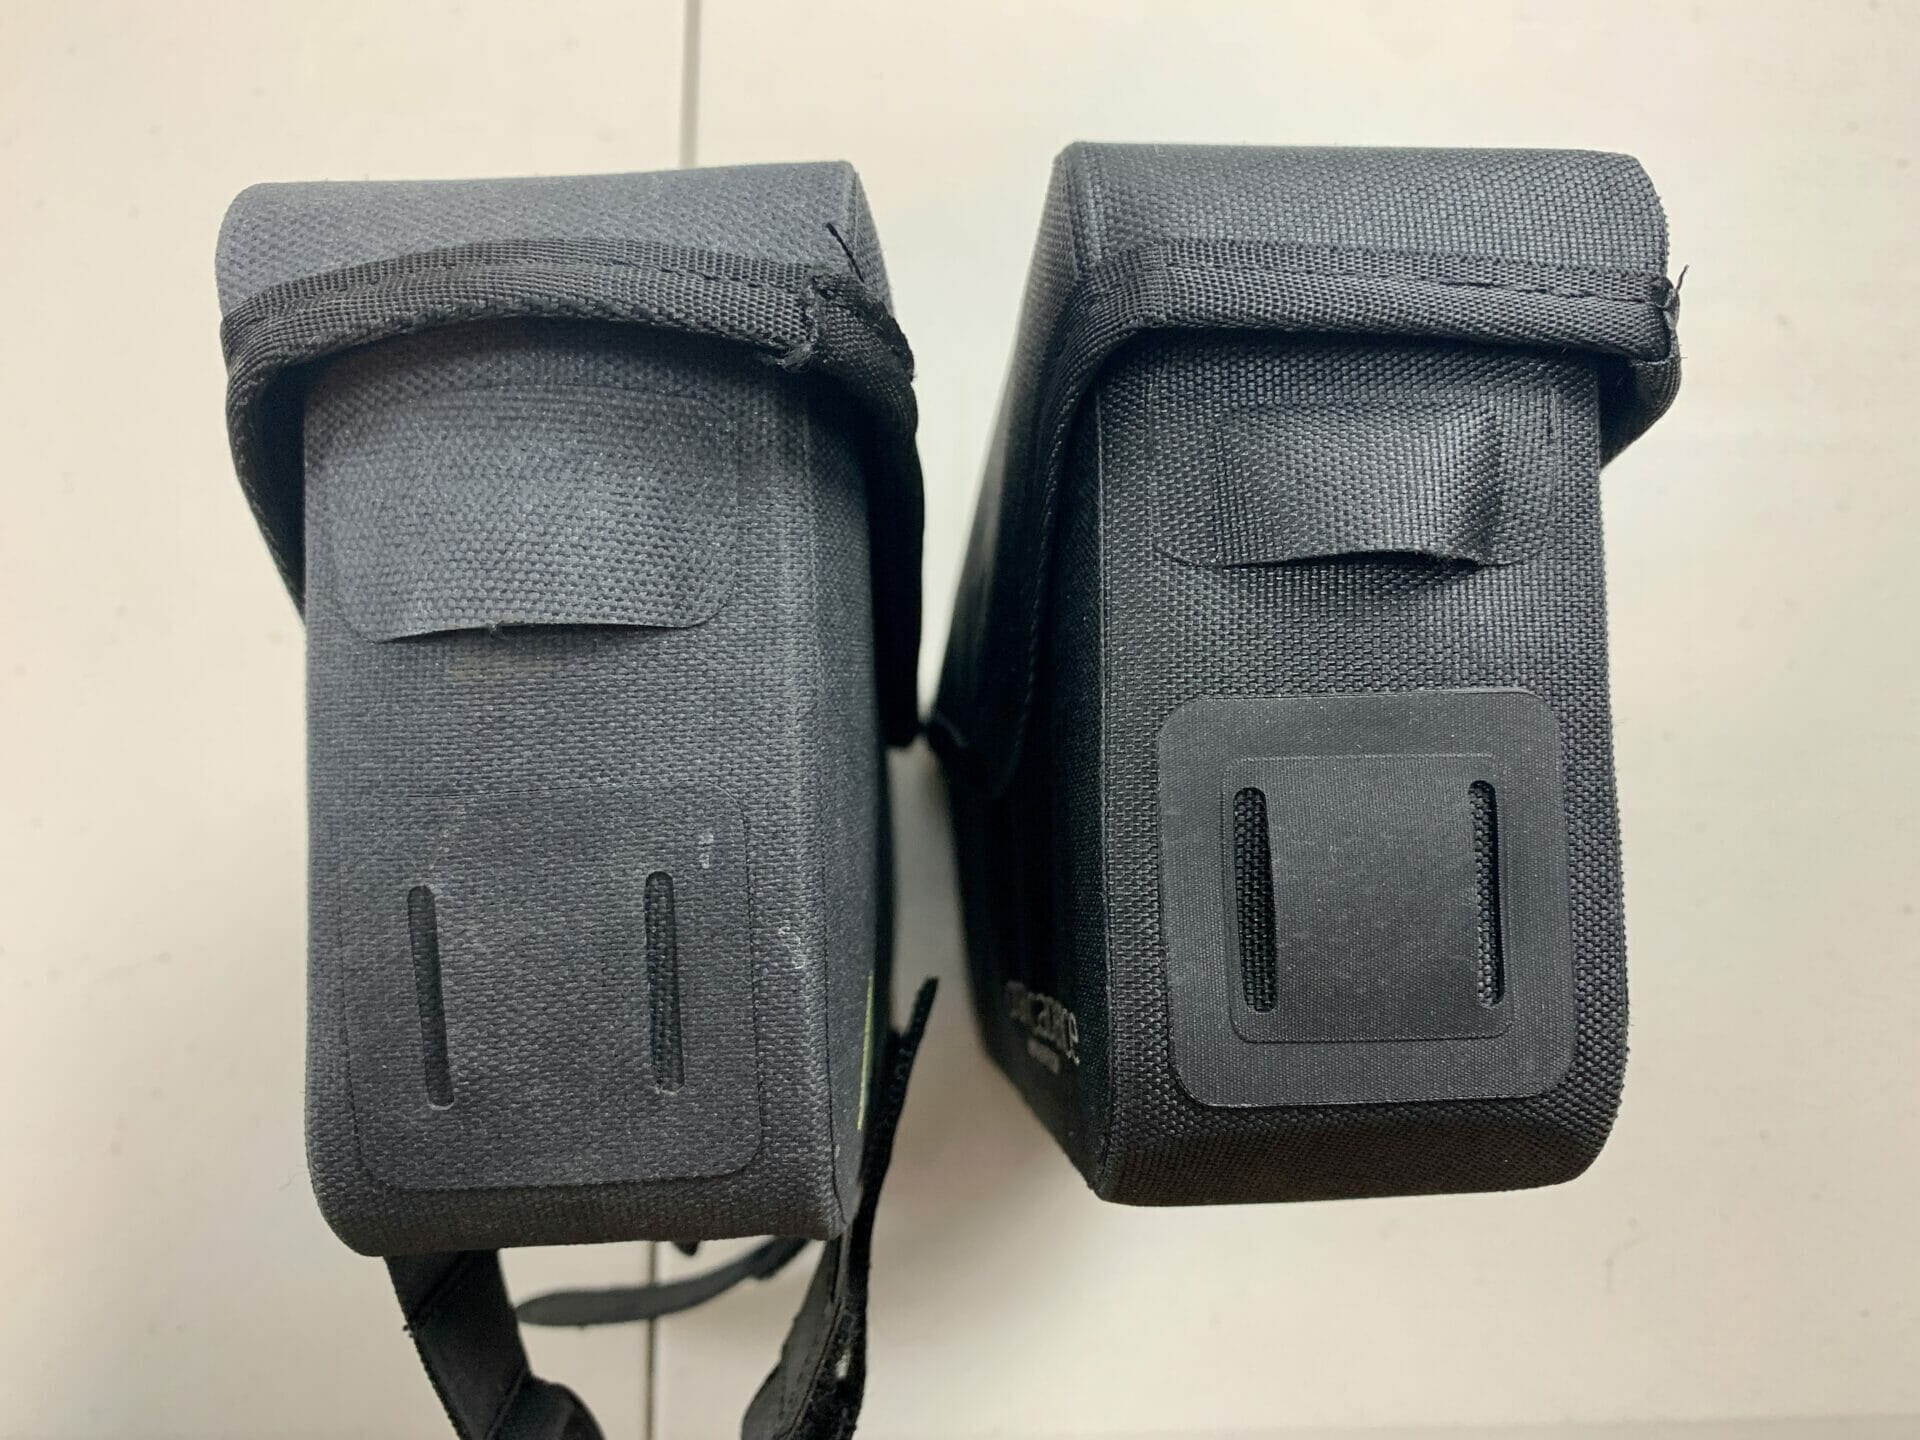 side by side comparison of strap version to bolt on version